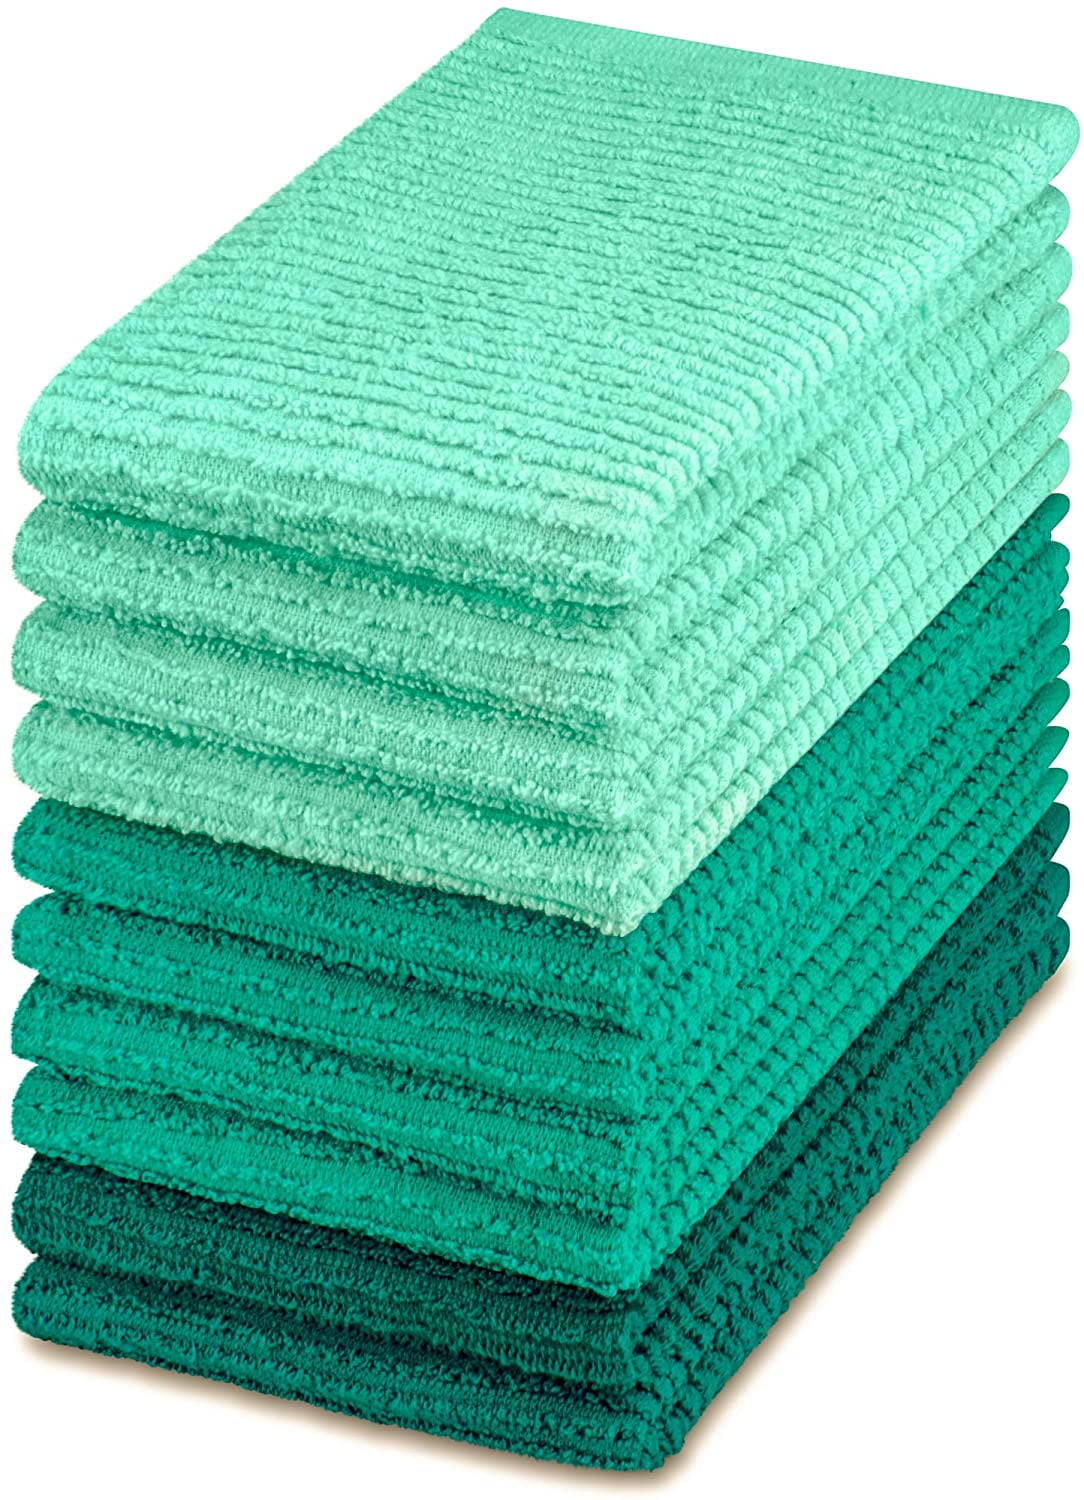 DecorRack 10 Pack 100% Cotton Bar Mop, 16 x 19 inch, Kitchen Cleaning Towels,  Spring Colors 